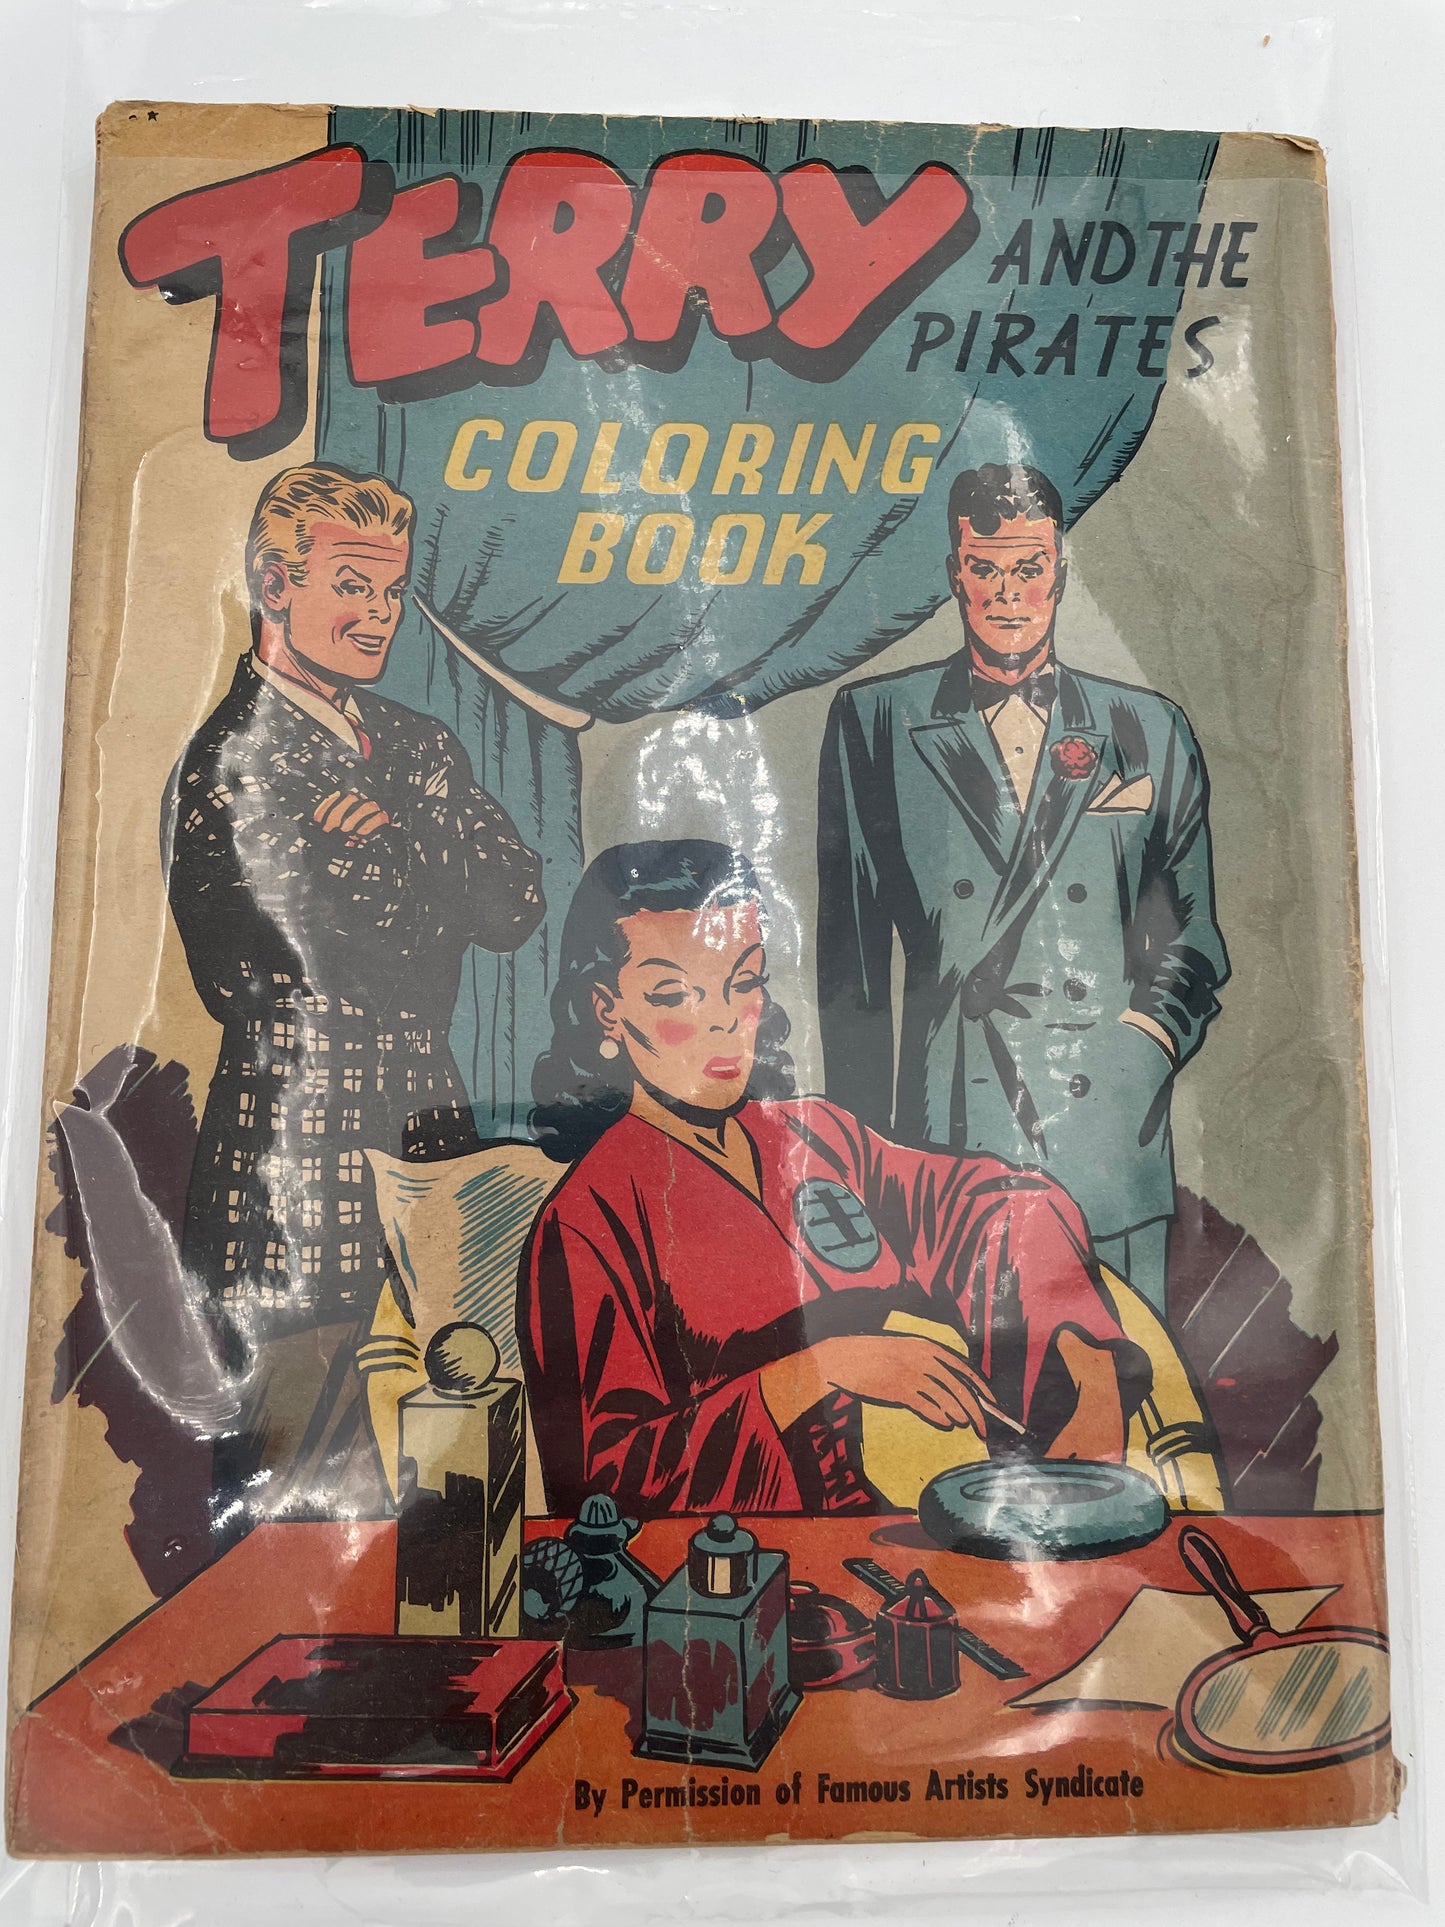 Terry and the Pirates Coloring Book 1946 #101793